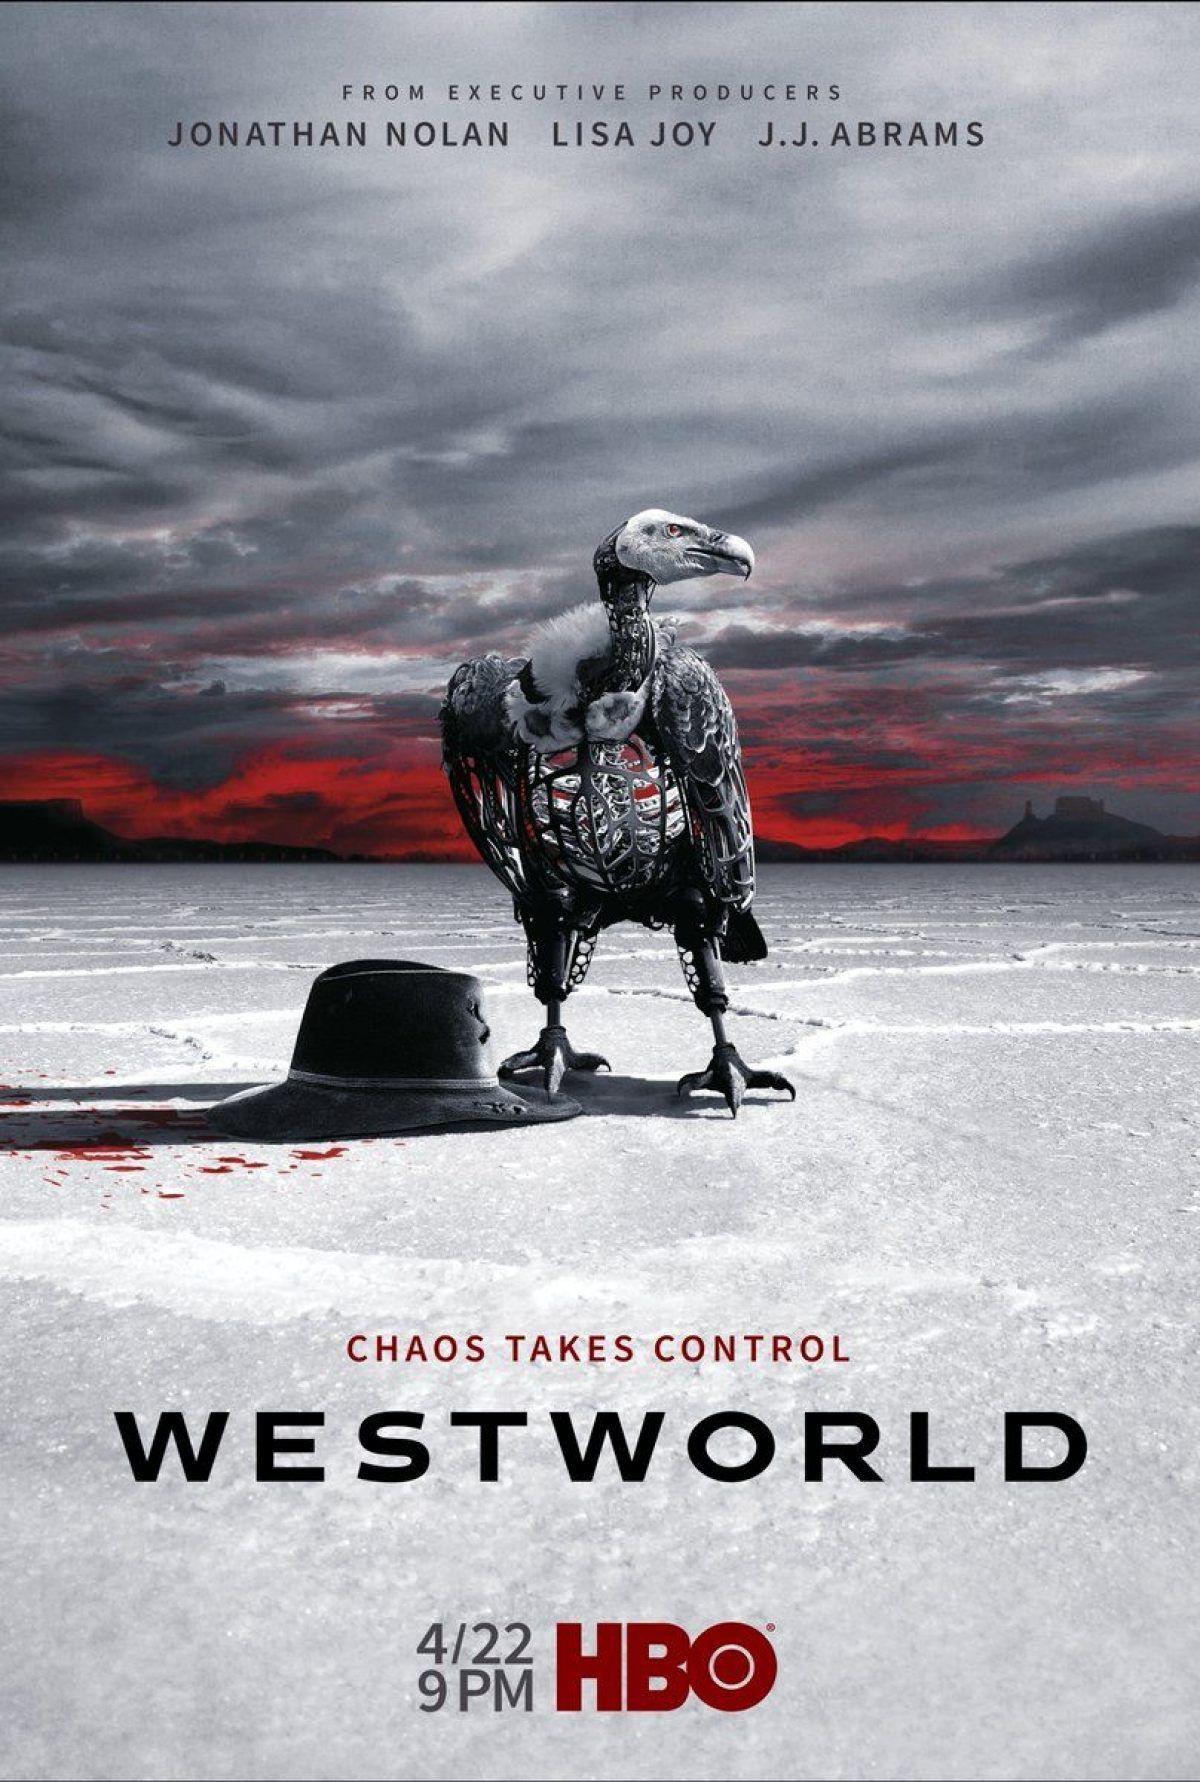 We Would Wallpaper Our Homes With This WESTWORLD Season Two Poster